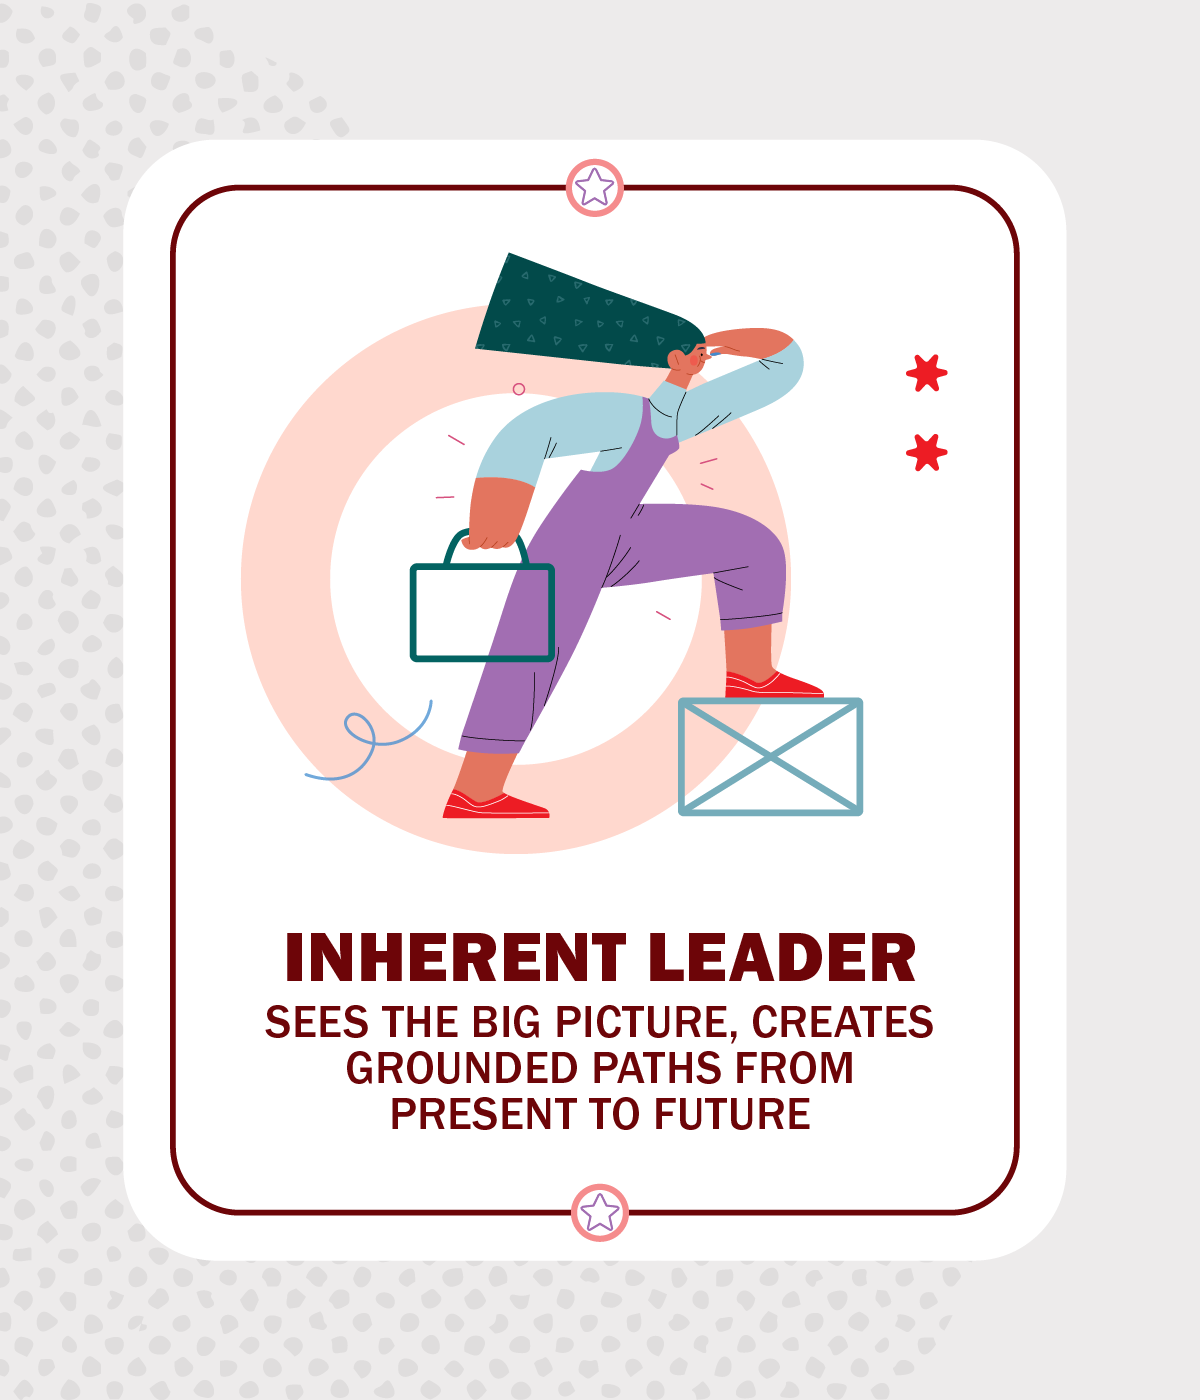 woman leader with hand to forehead looking ahead, inherent leader persona card